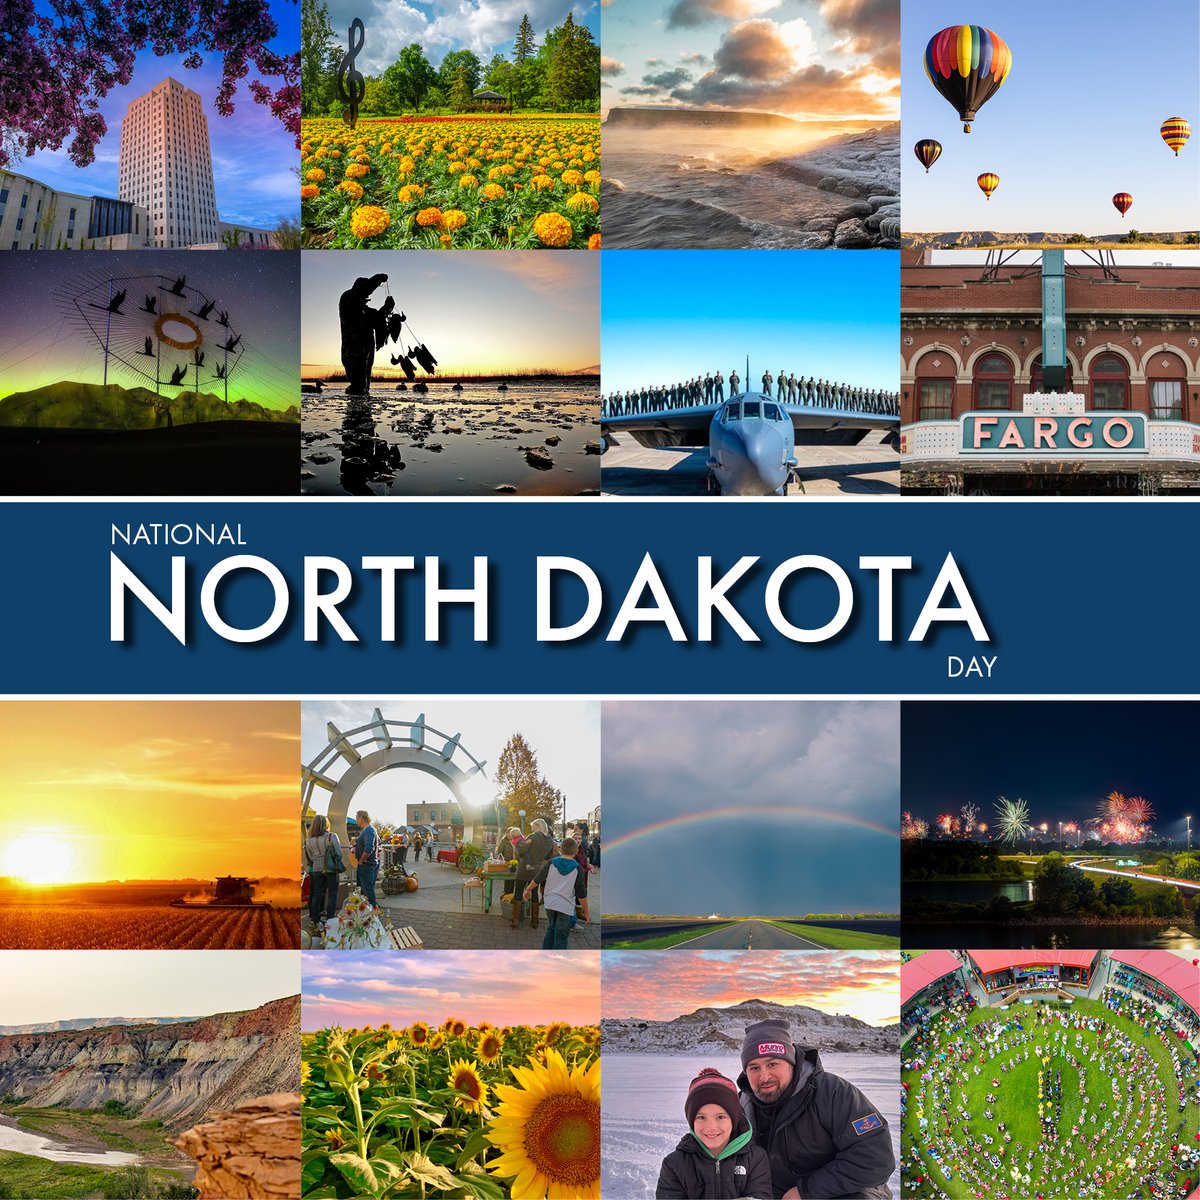 Happy #NationalNorthDakotaDay! We love the place we call home, and today we celebrate our great state and all North Dakotans!